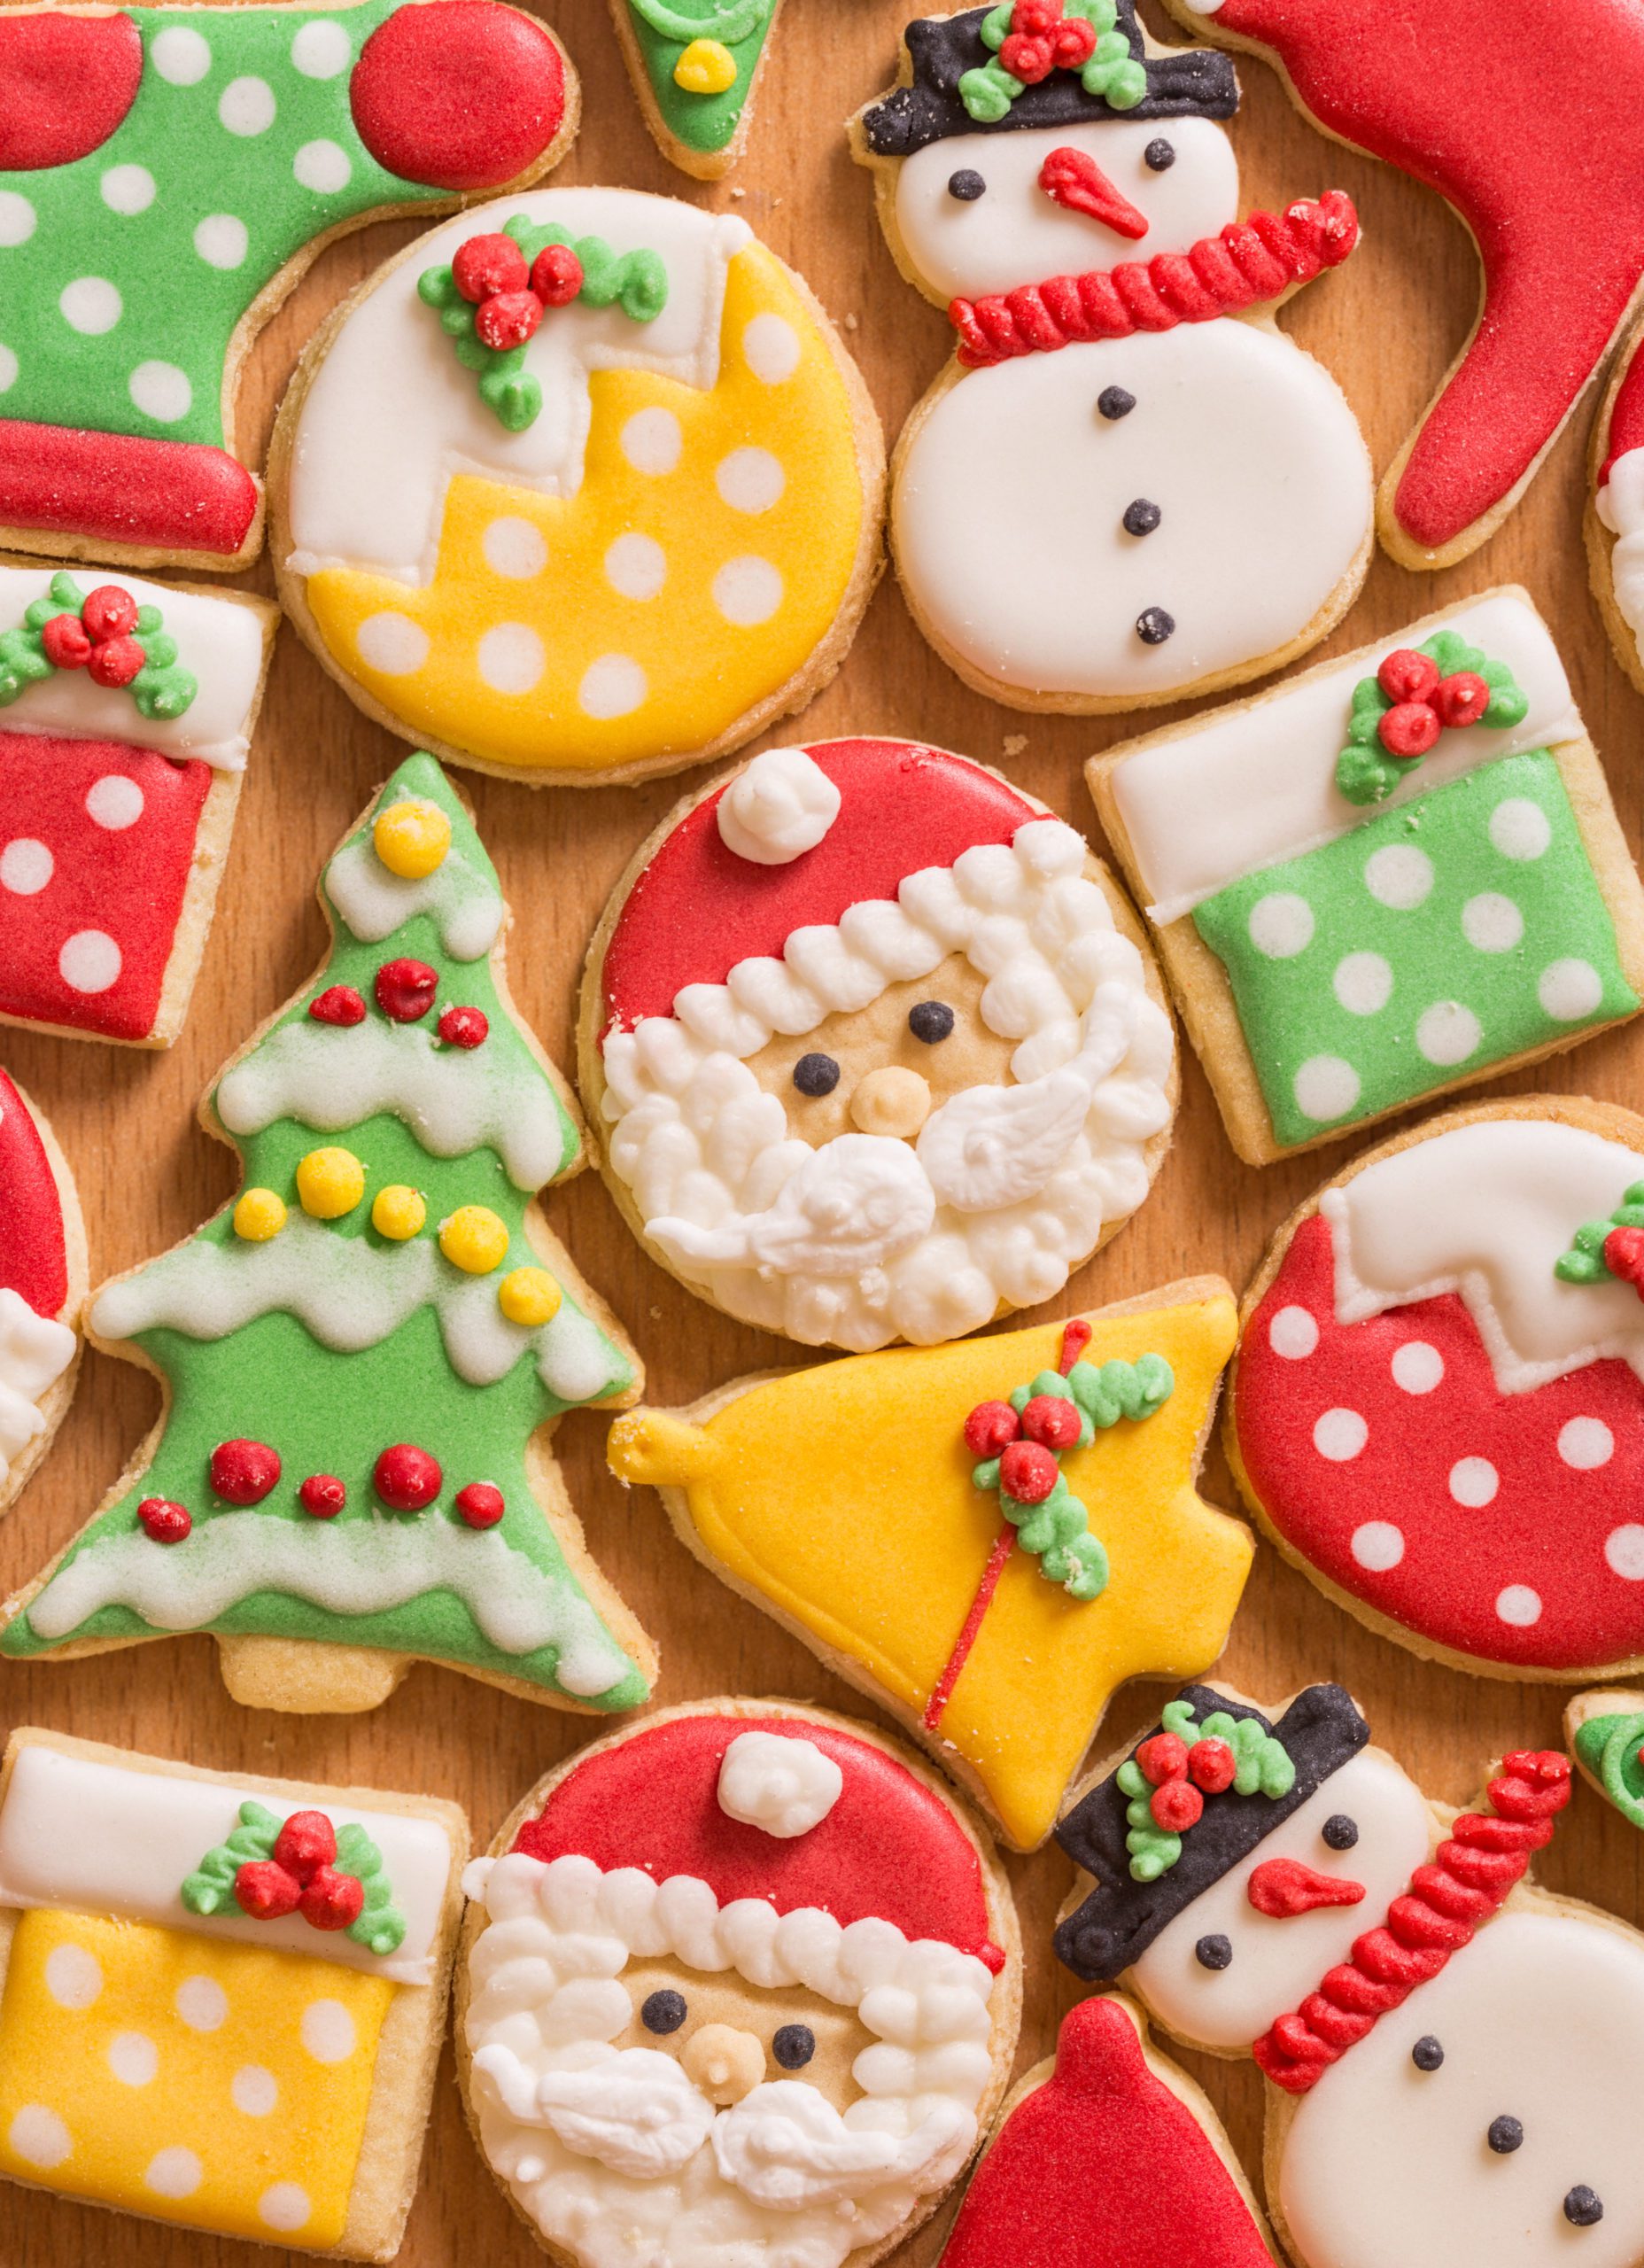 Everything You Need to Decorate Holiday Cookies